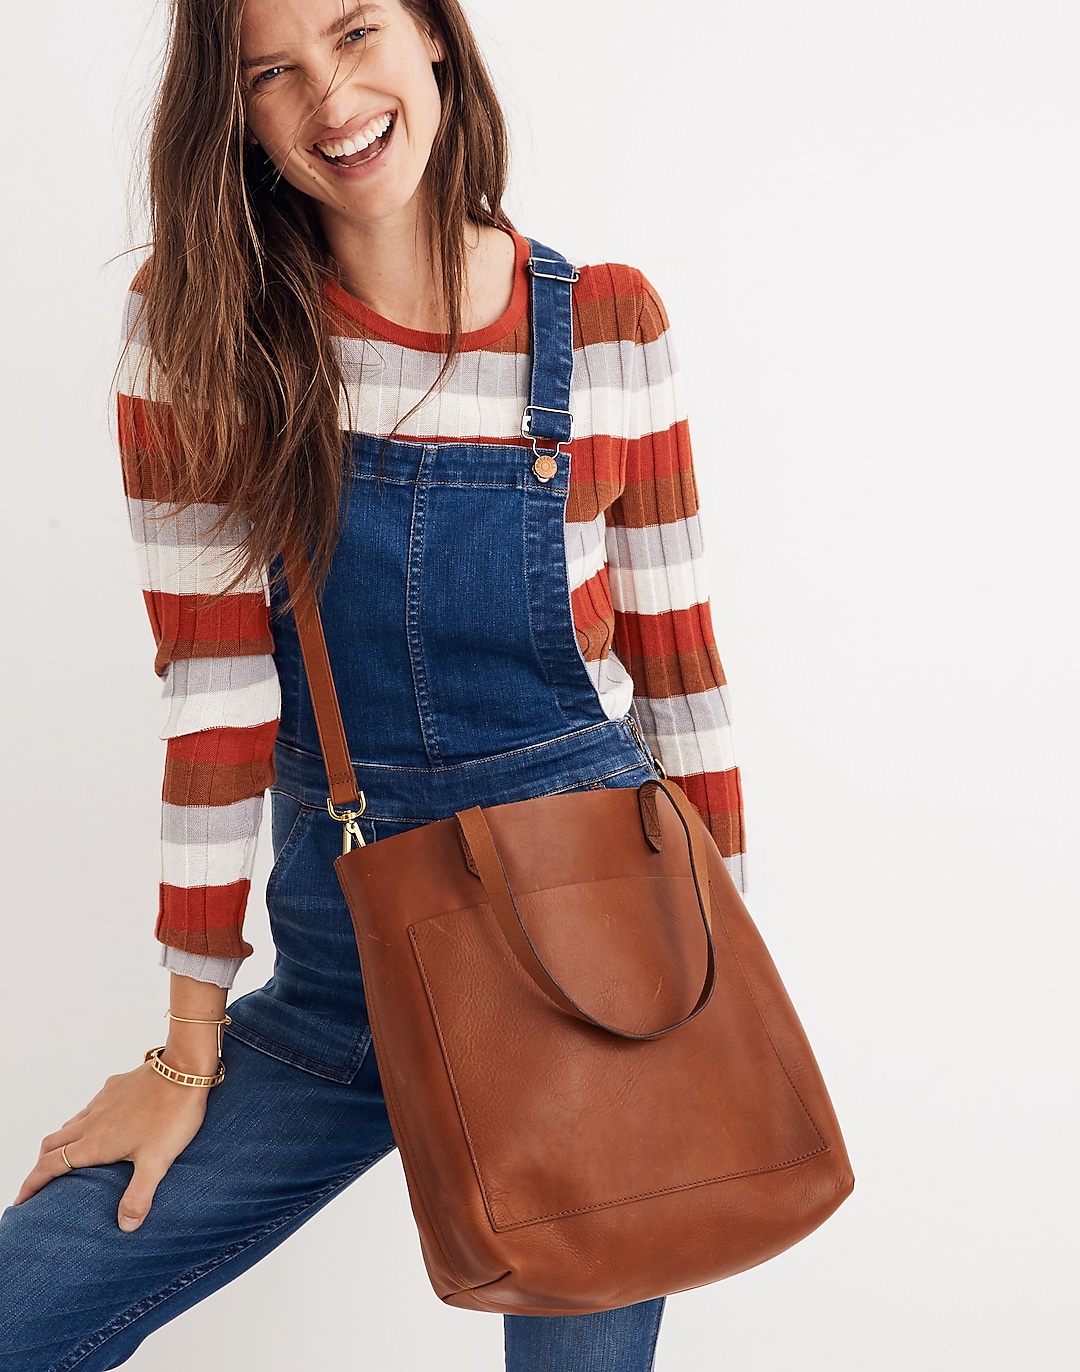 Madewell Foldover Transport Tote Sale 2021